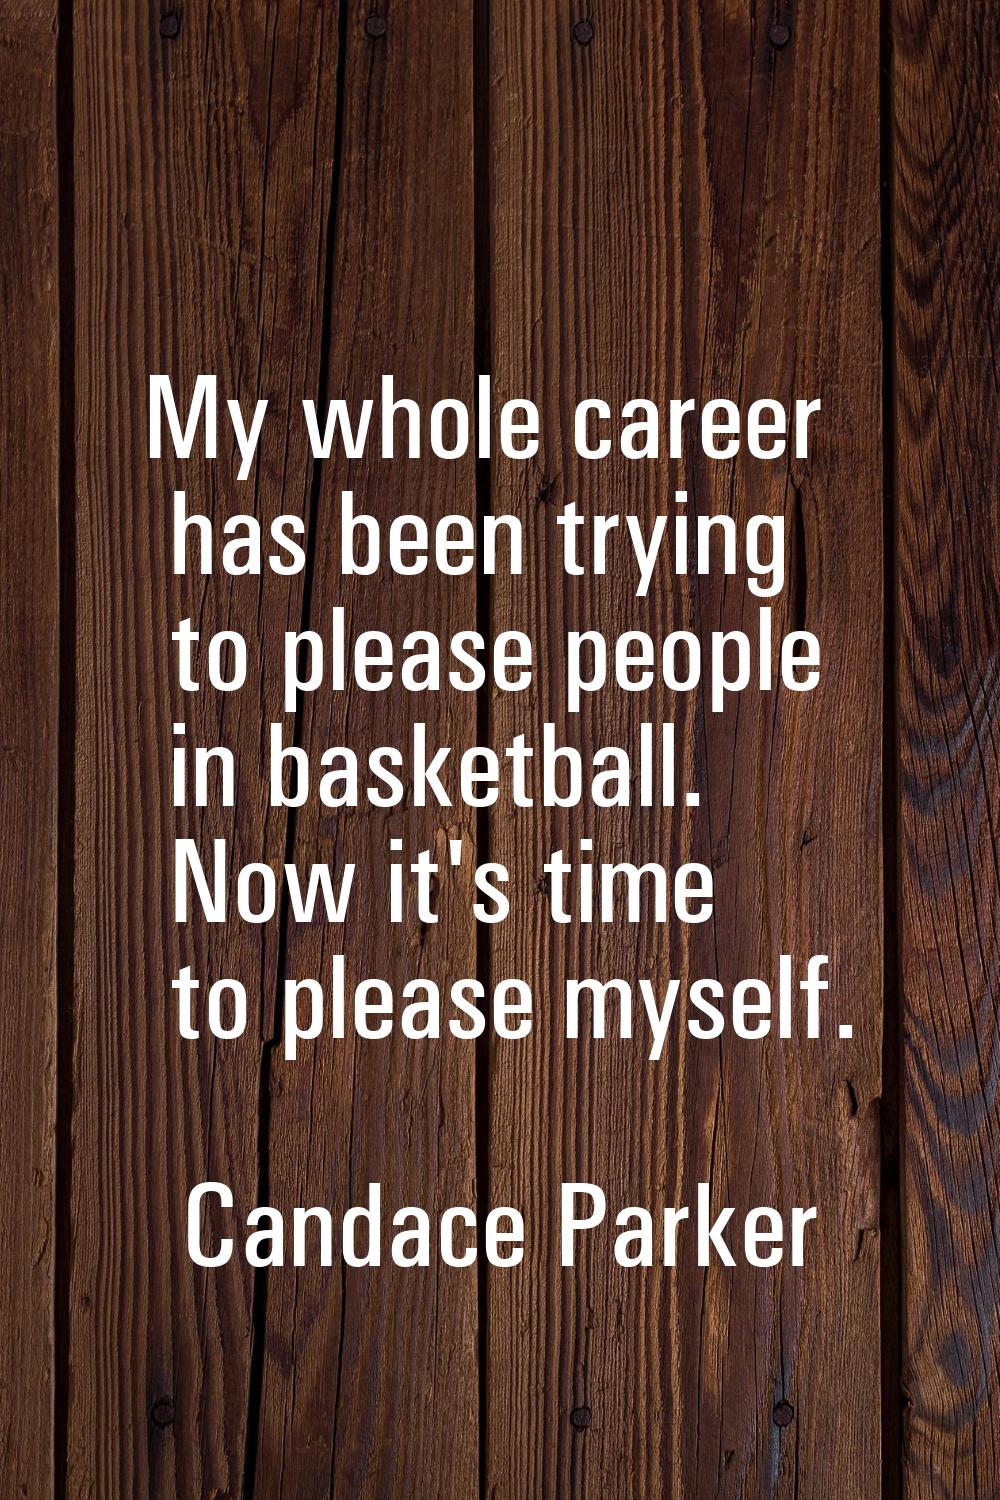 My whole career has been trying to please people in basketball. Now it's time to please myself.